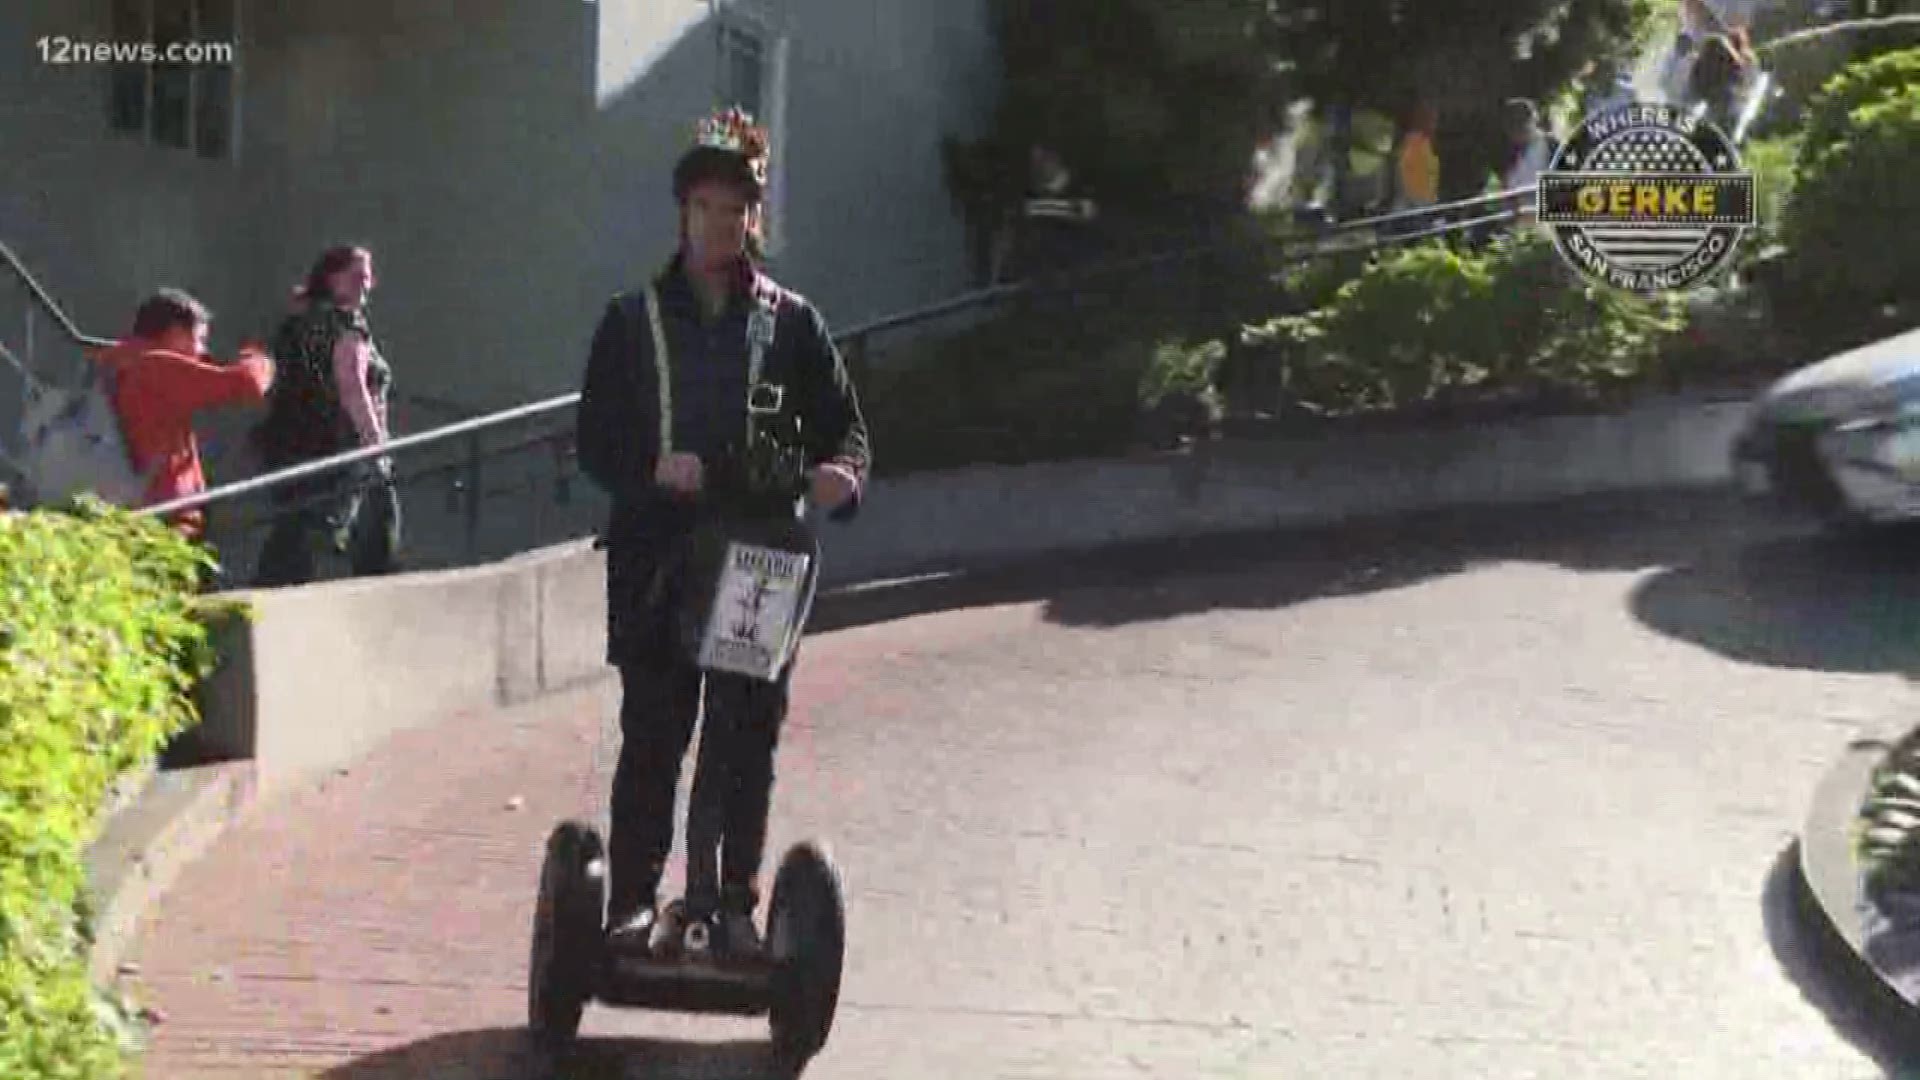 Paul maneuvers Lombard Street in San Francisco on a Segway.